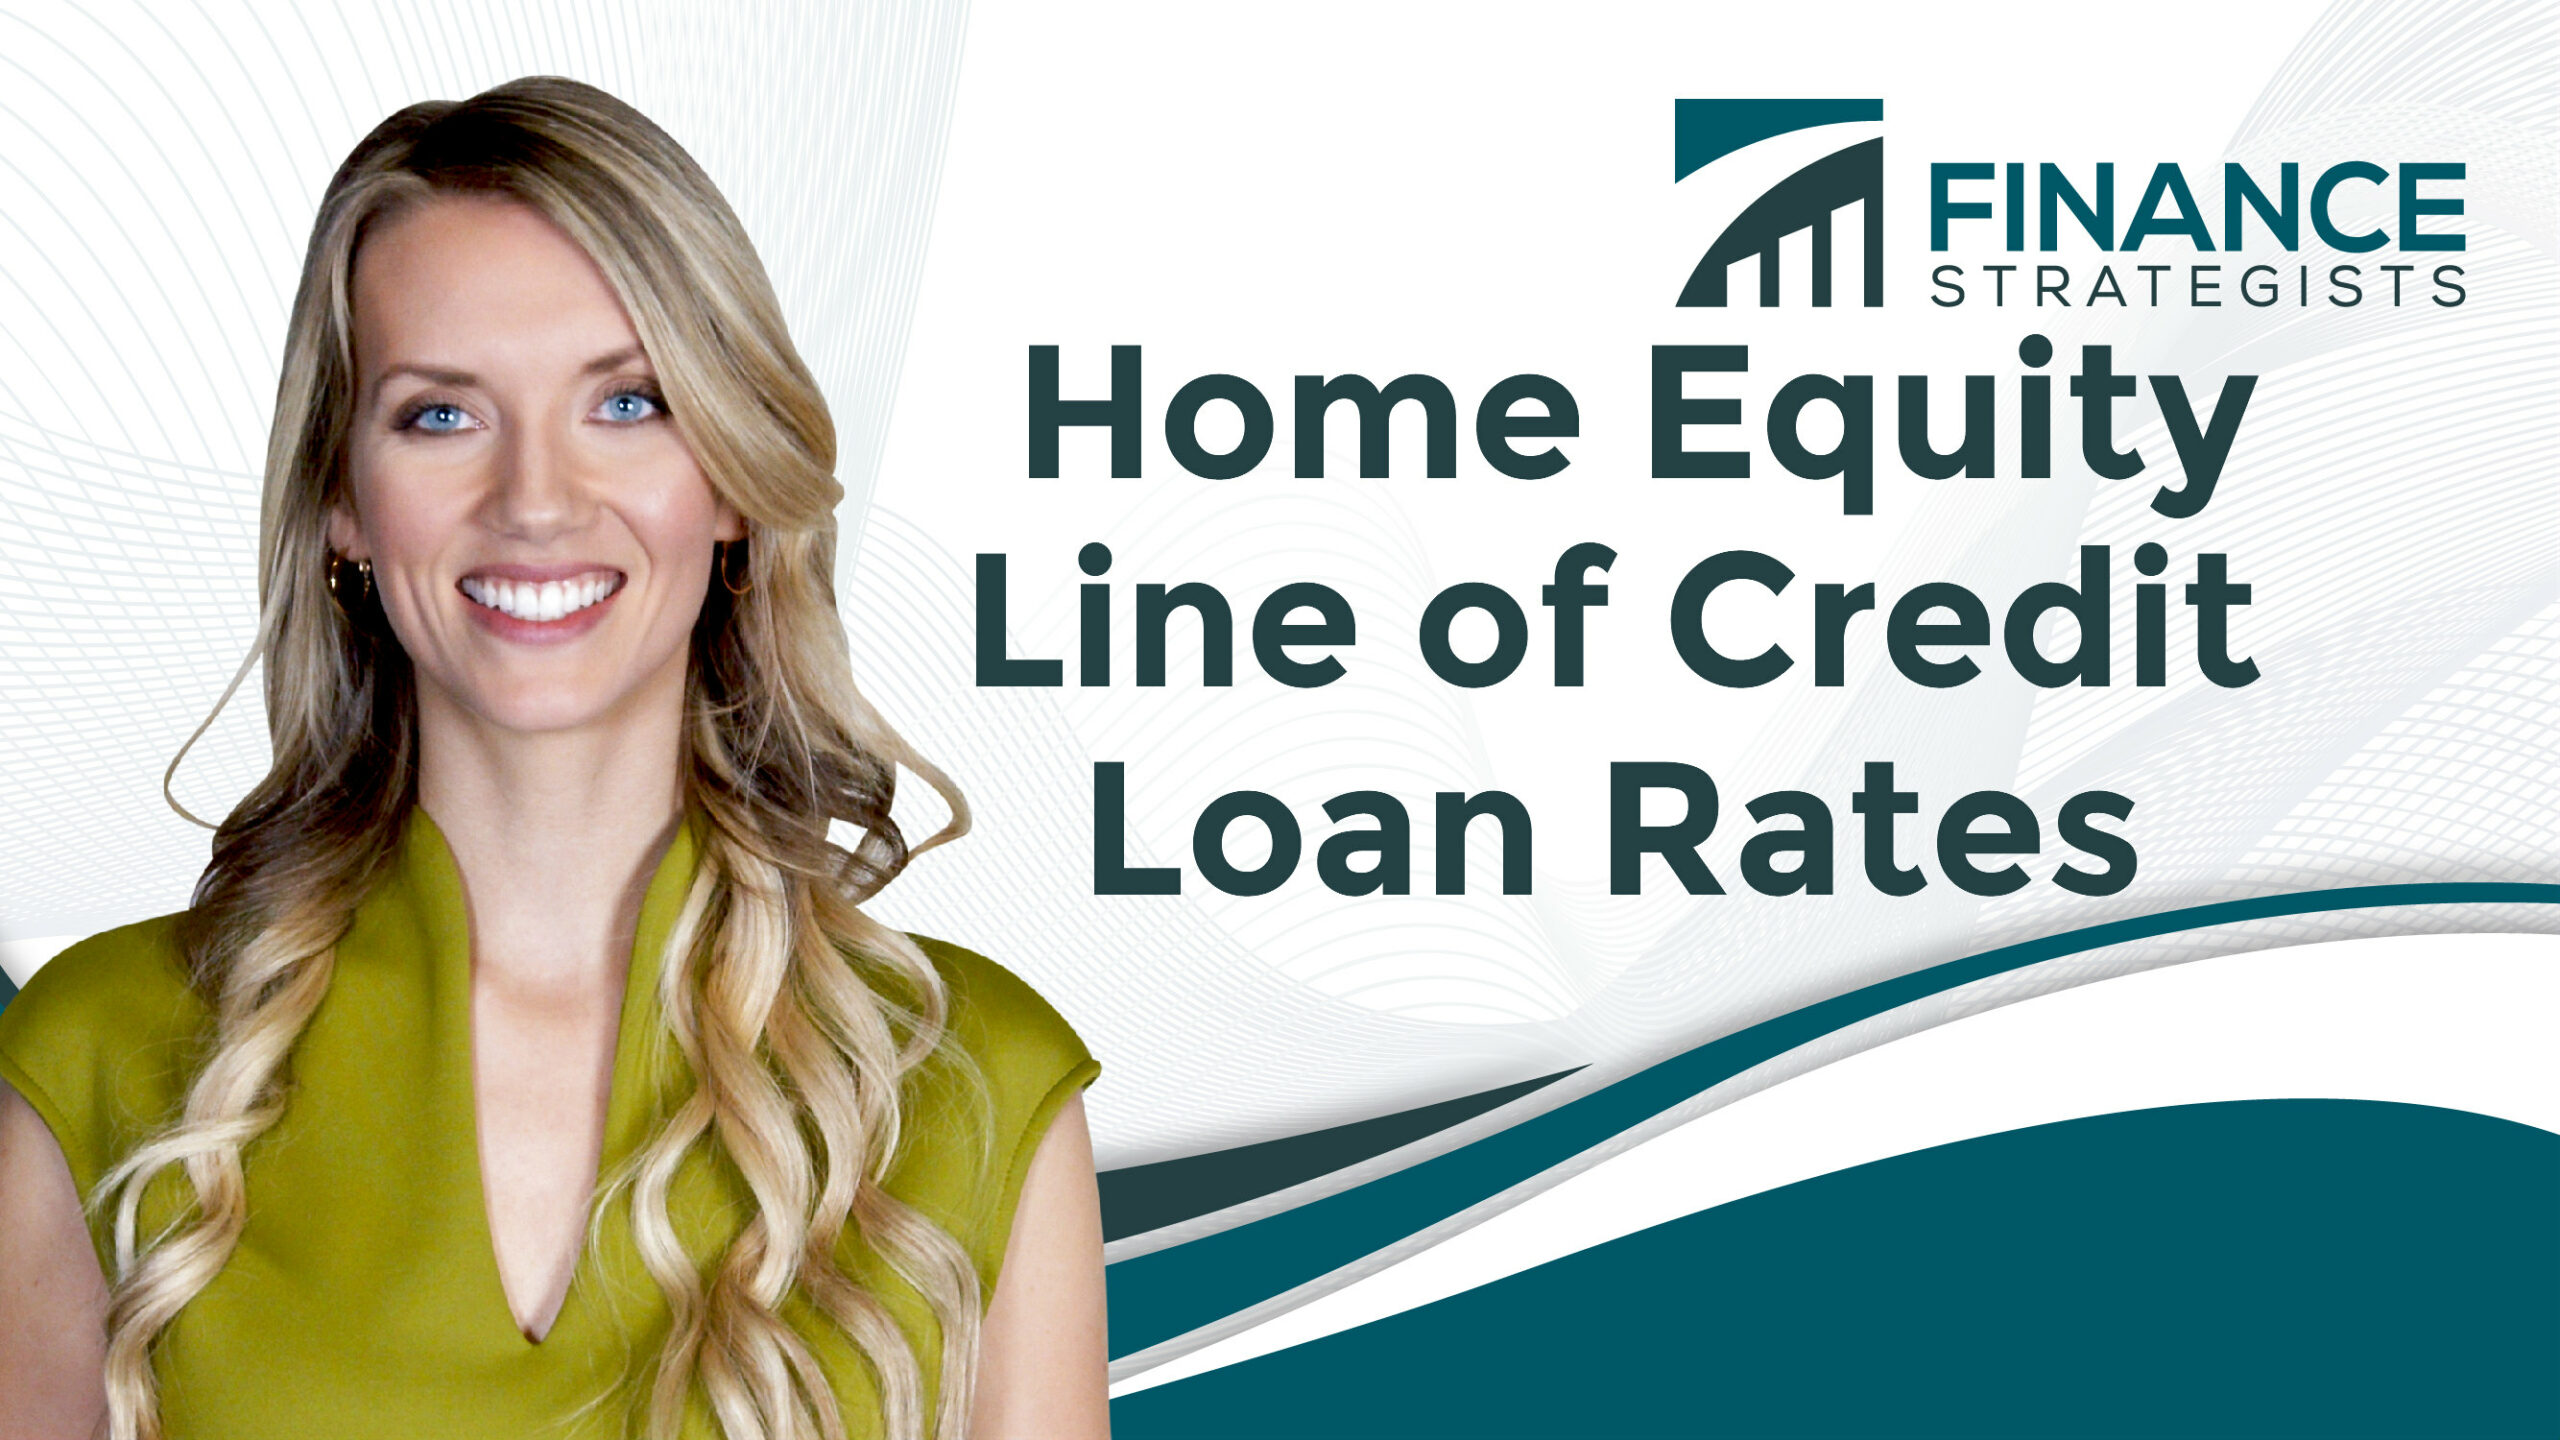 Becu Home Equity Loan Rates